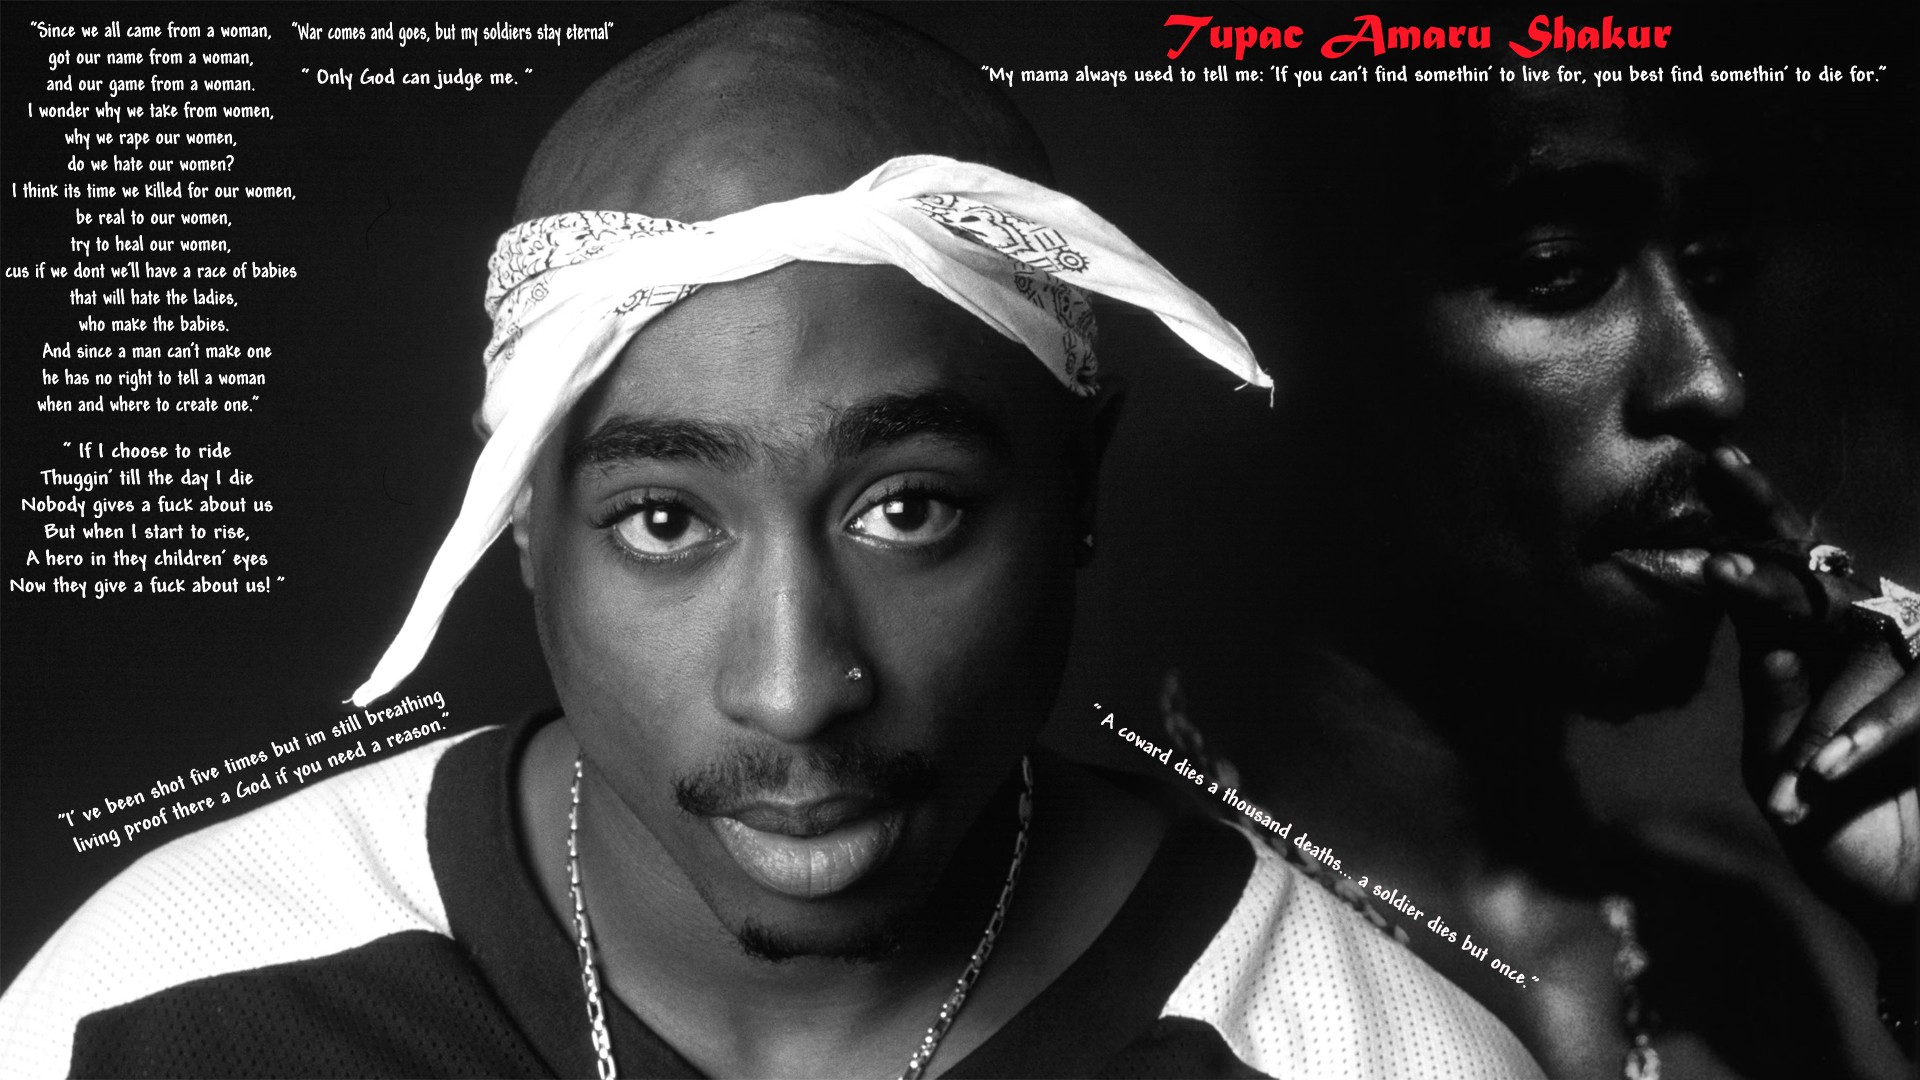 Tupac Amaru Shakur, also known by his stage names 2Pac and Makaveli